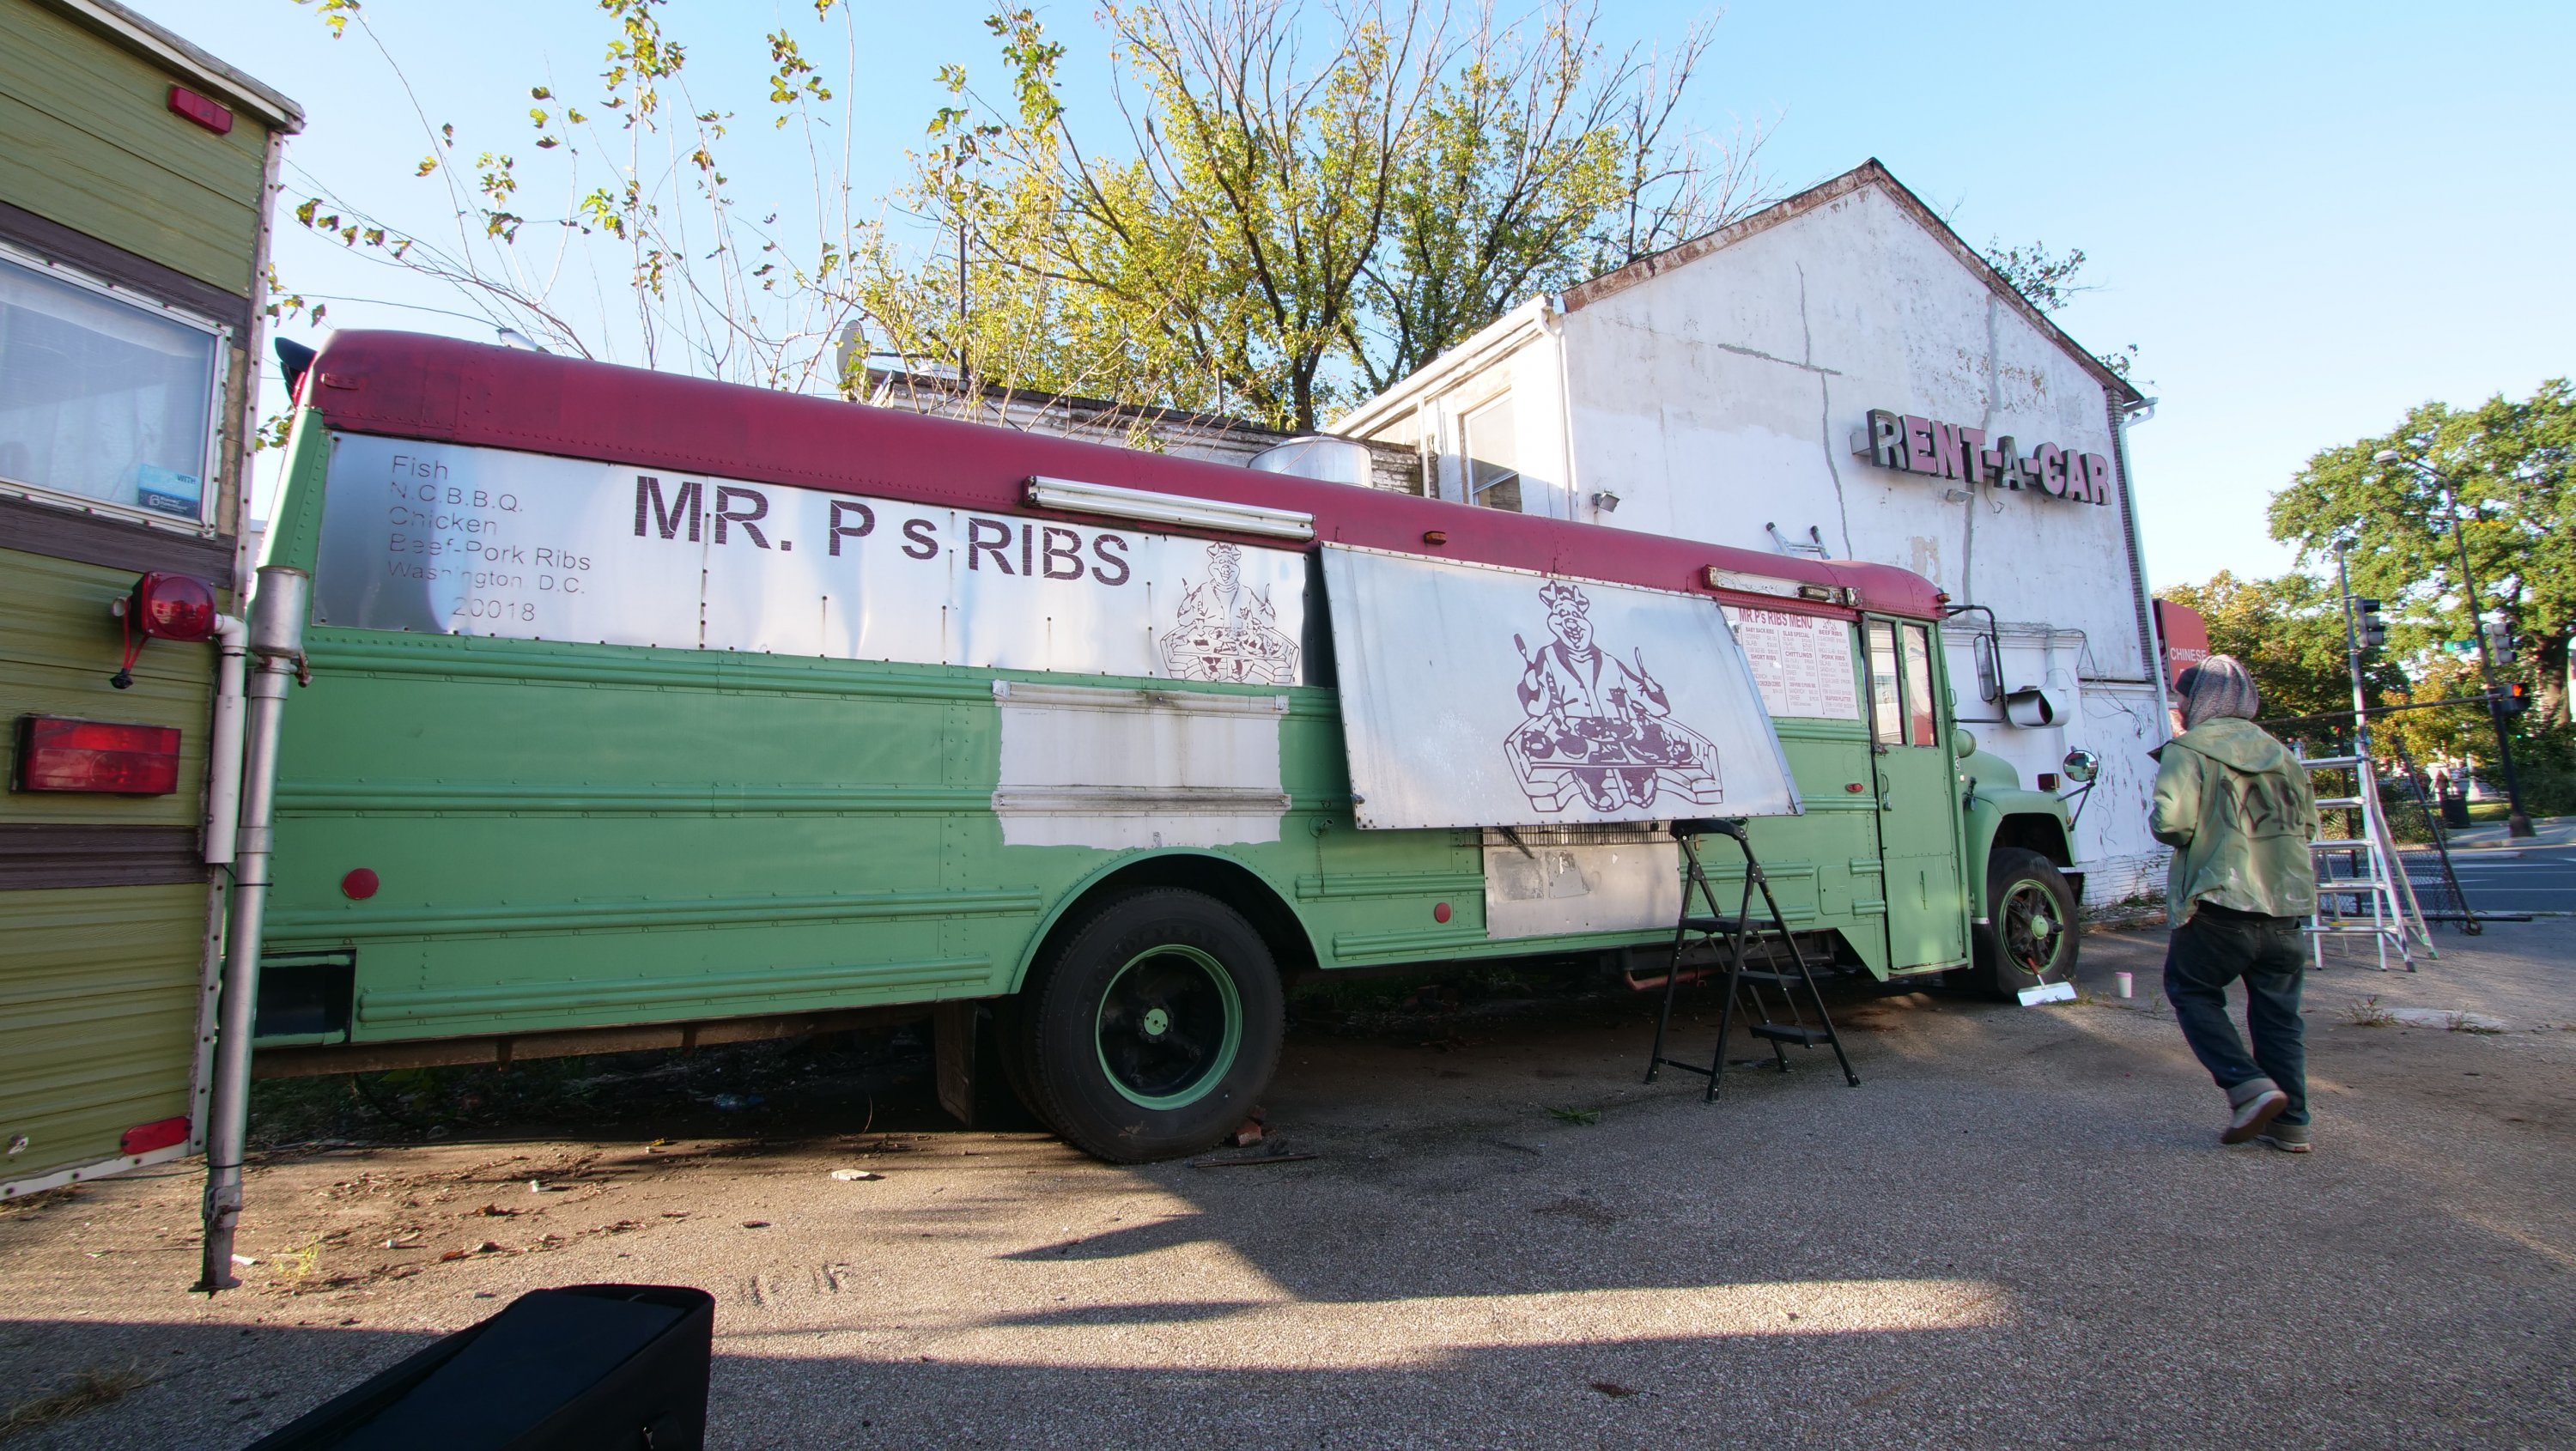 The original Mr. P's van remained in the abandoned parking lot. Photograph by Lisa Bolden. 